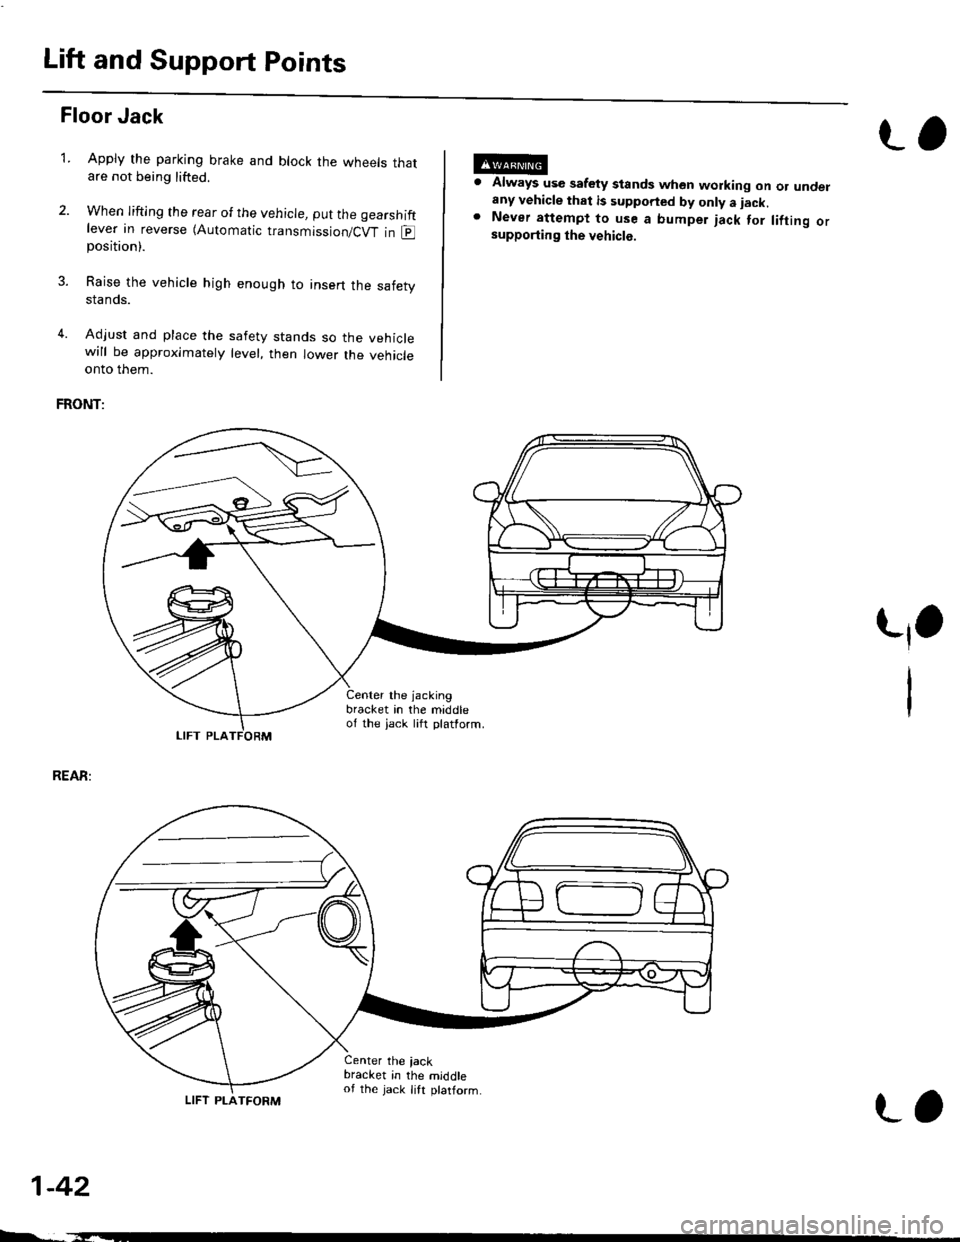 HONDA CIVIC 1996 6.G Workshop Manual Lift and Support Points
Floor Jack
Apply the parking brake and block the wheets thatare not being lifted.
When lifting the rear of the vehicle, put the gearshiftlever in reverse (Automatic transmissio